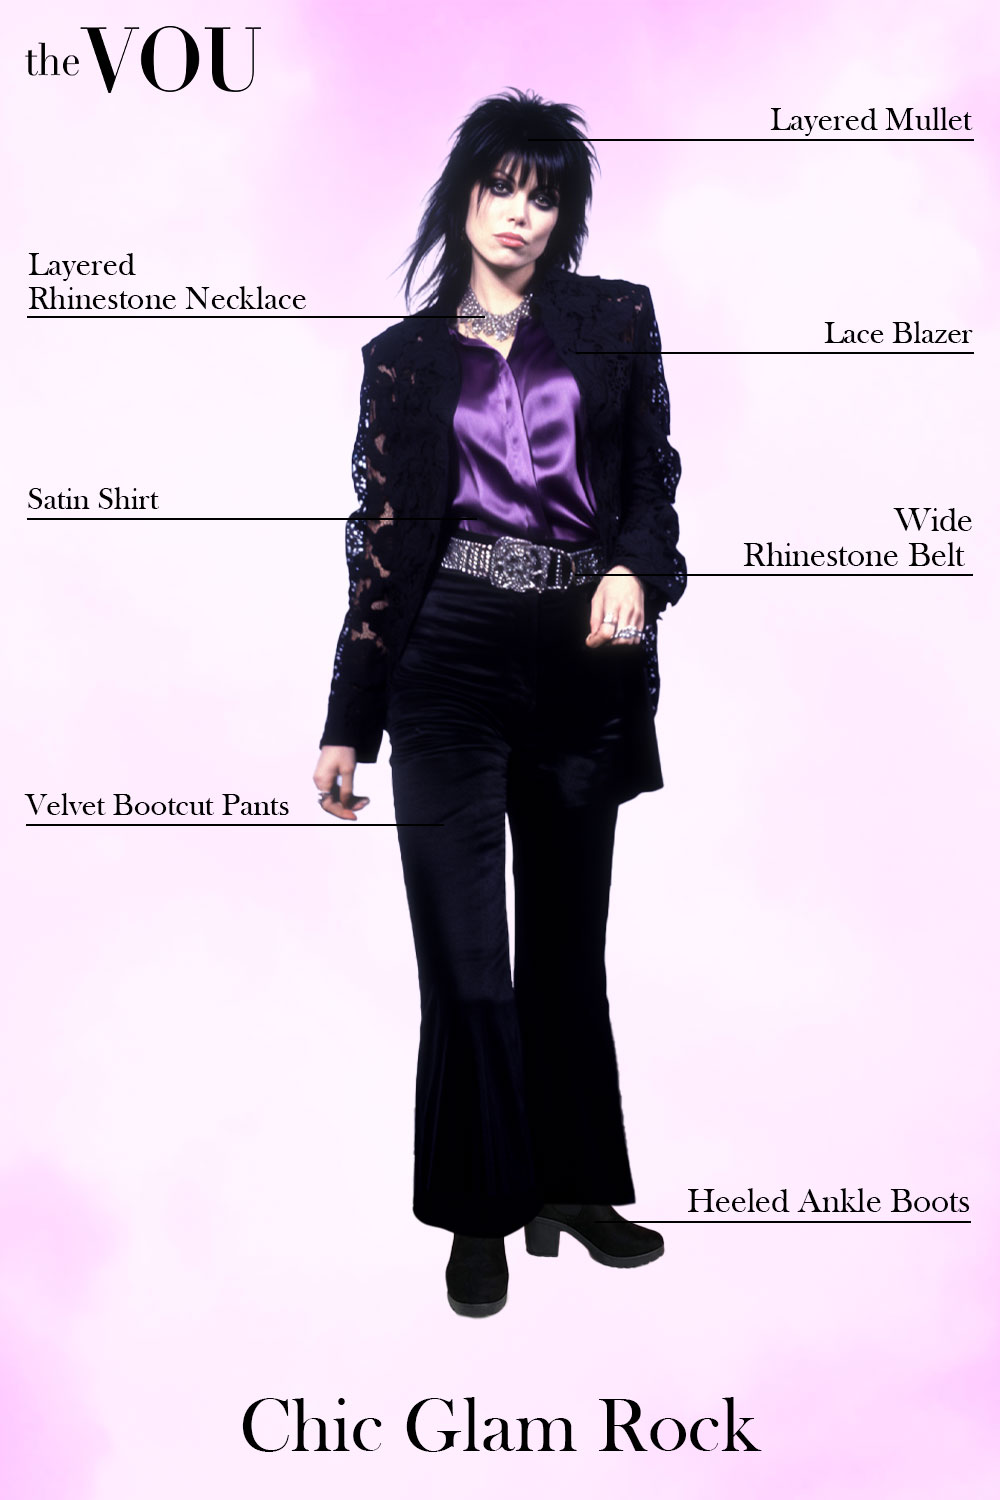 Chic Glam Rock style